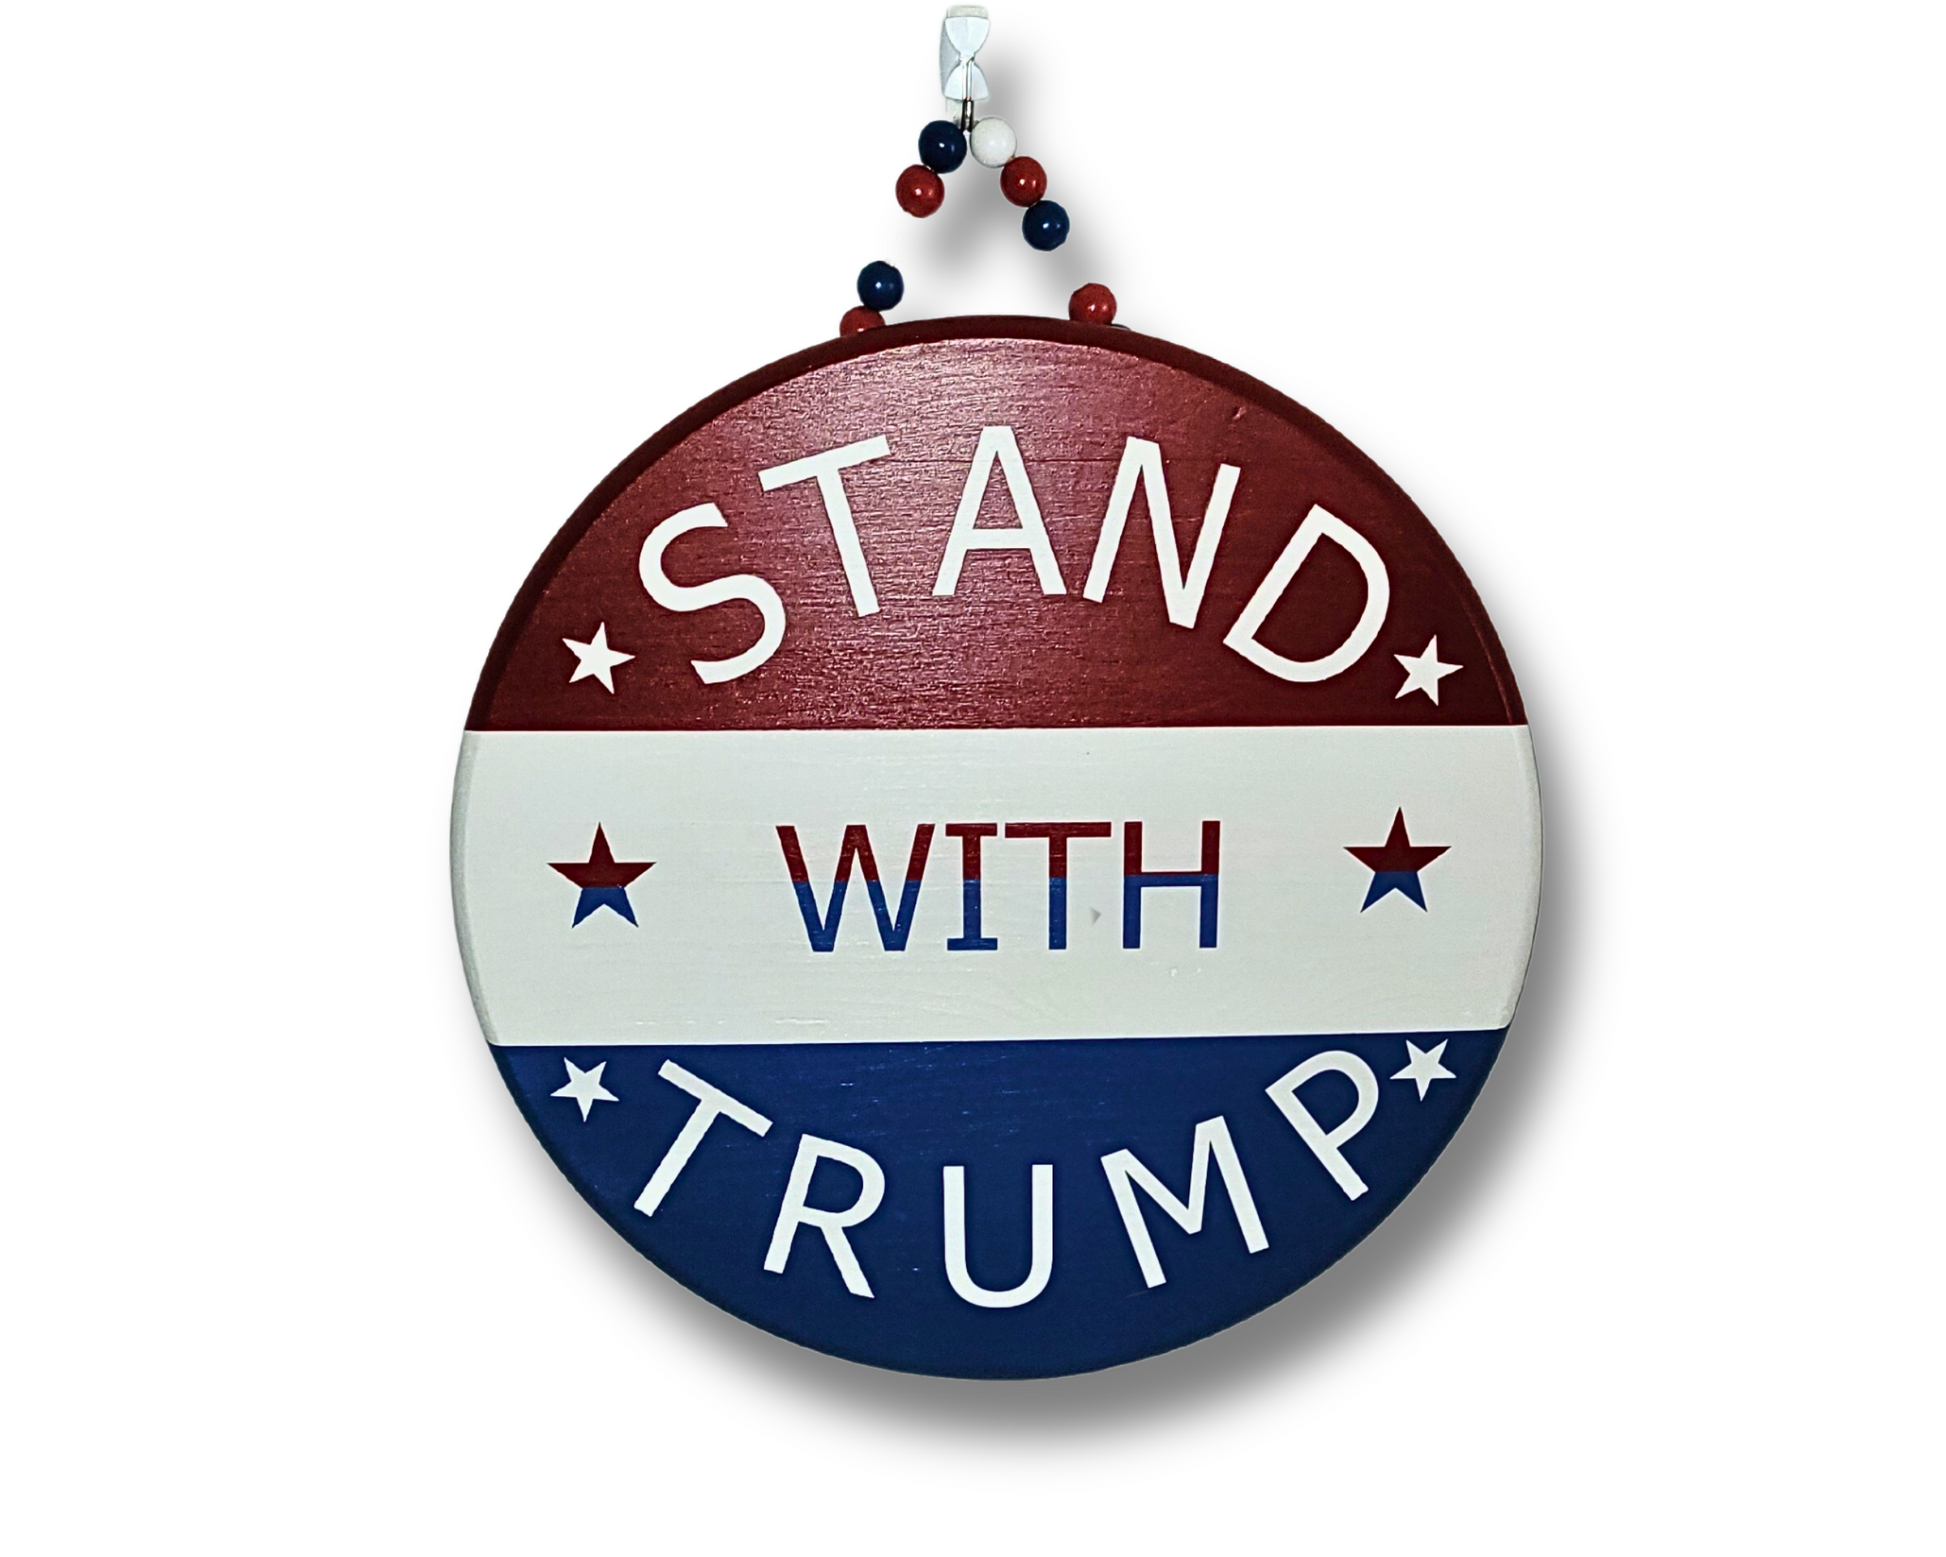 Stand With Trump Door Hanger - The Right Side Prints